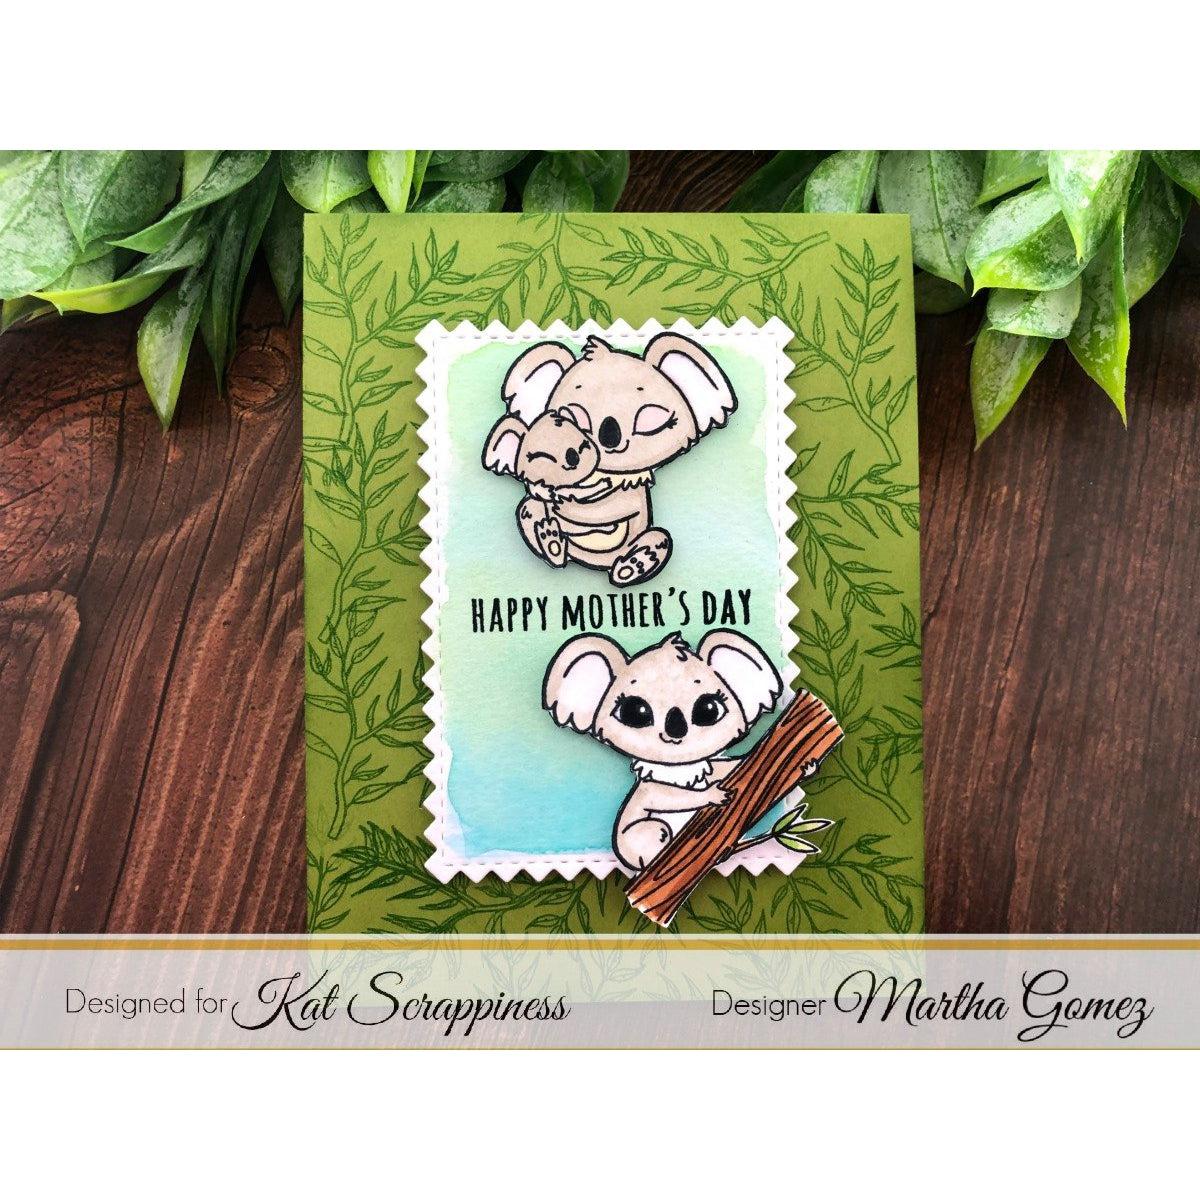 Koala-ty Time Stamp Set by Kat Scrappiness - Kat Scrappiness